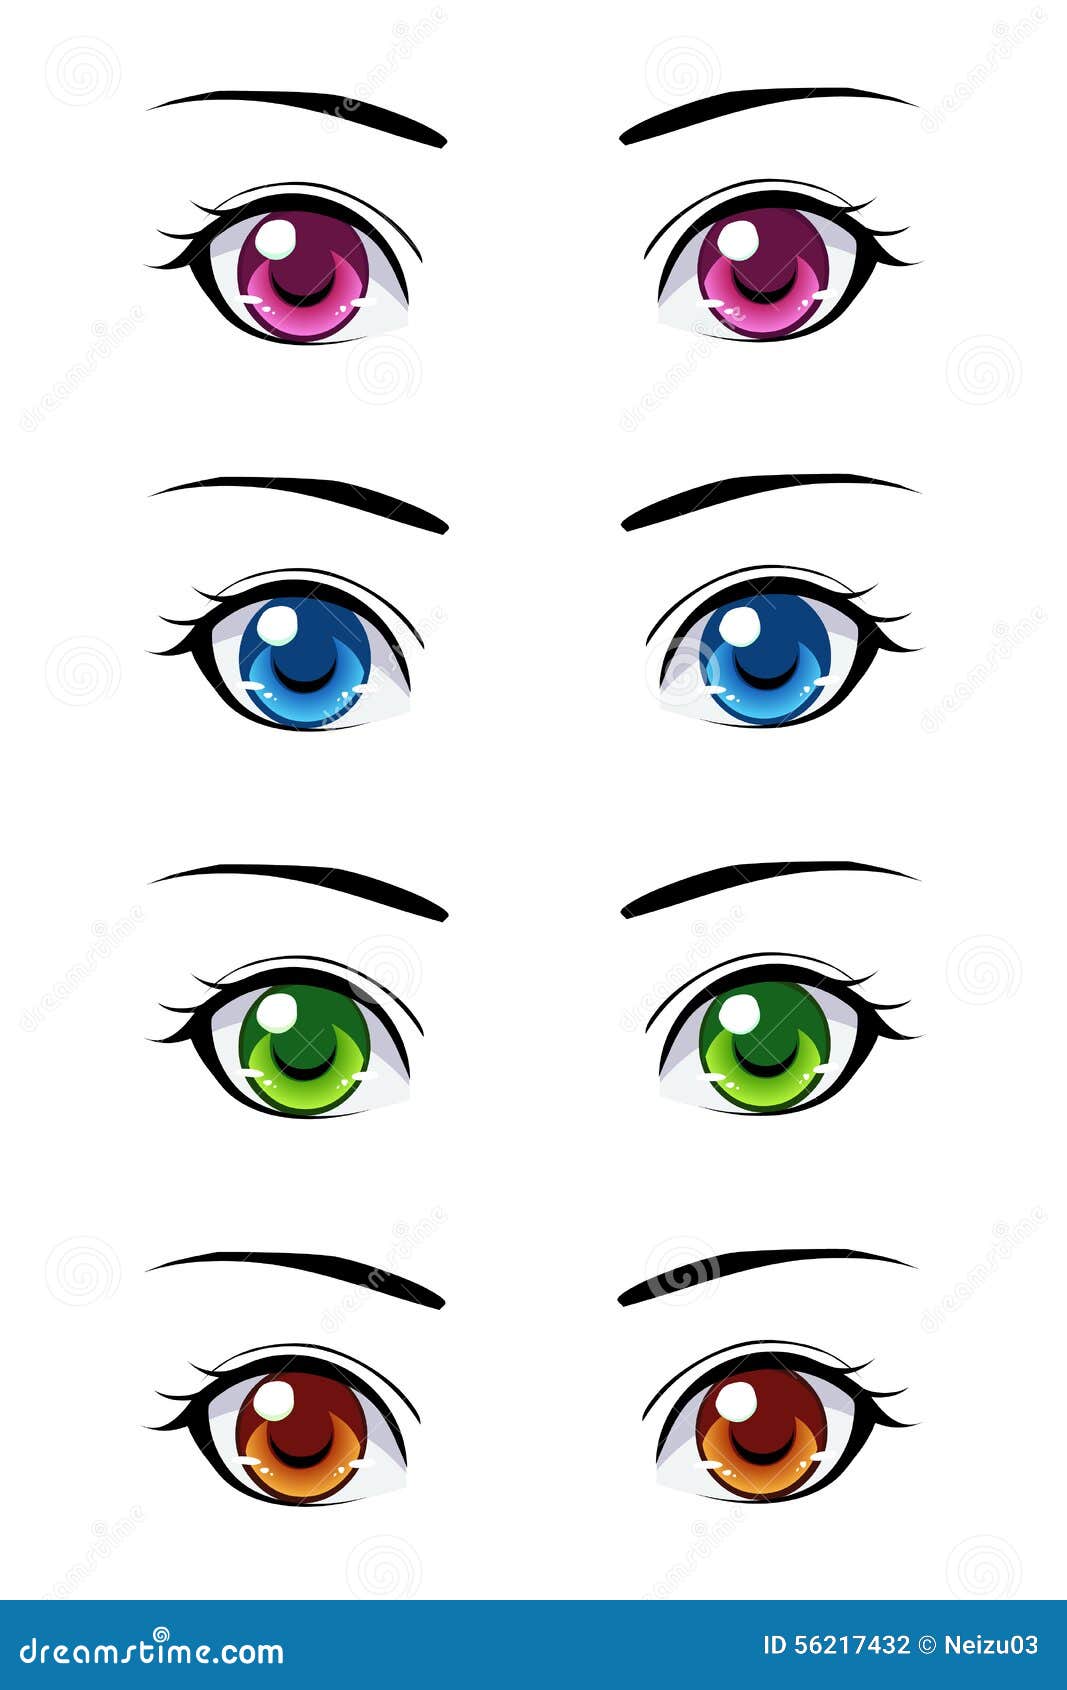 Anime Style Eyes Of Different Colors Illustration 56217432 - Megapixl